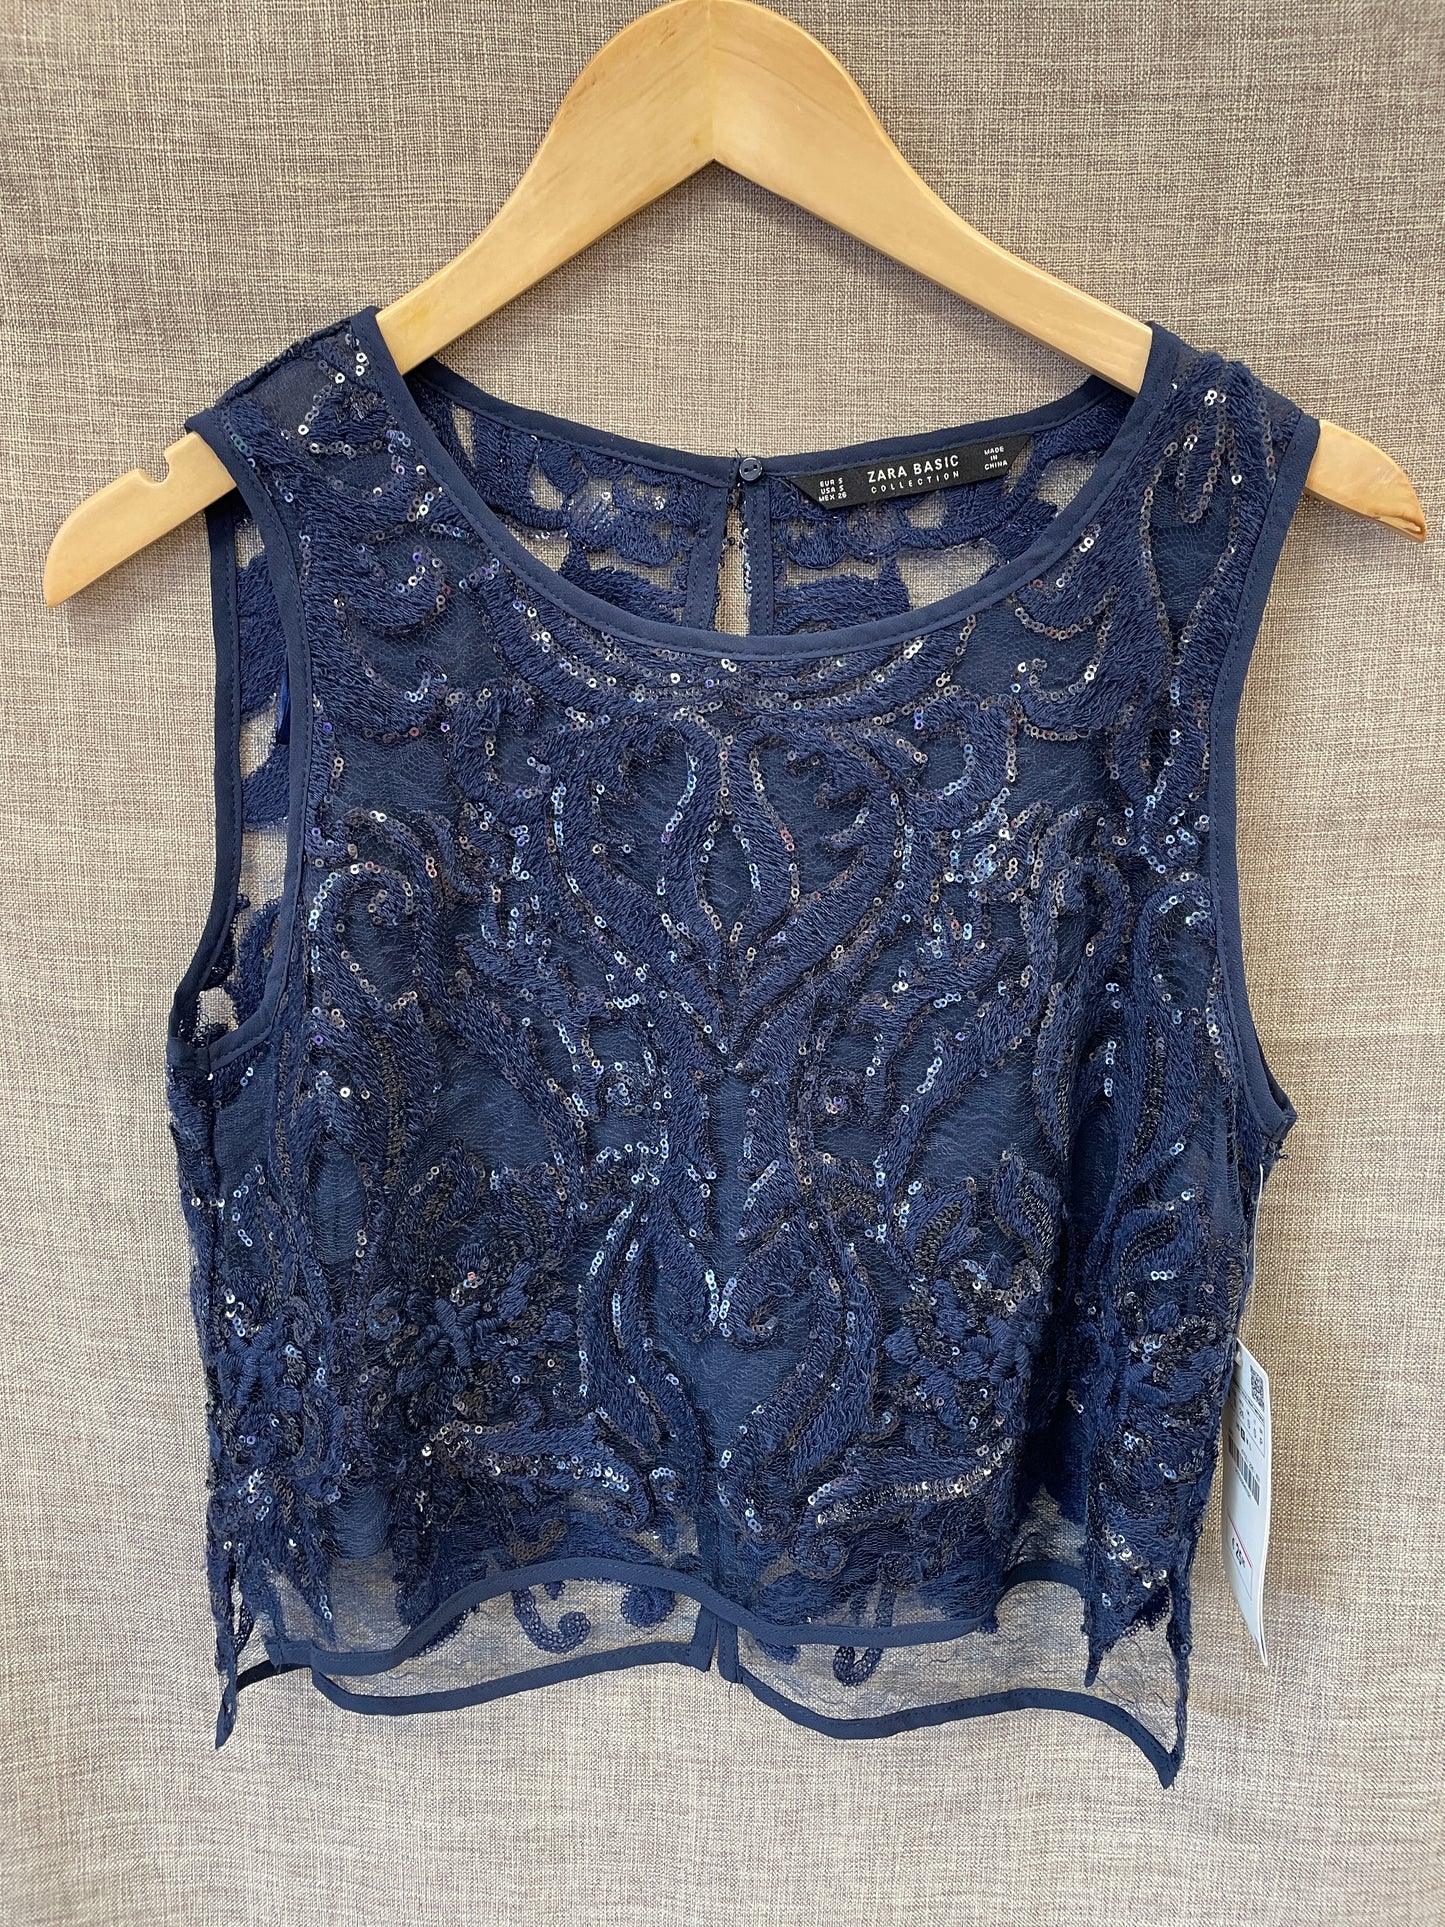 Zara New with Tags Navy Sequin Lace Crop Top Size Small